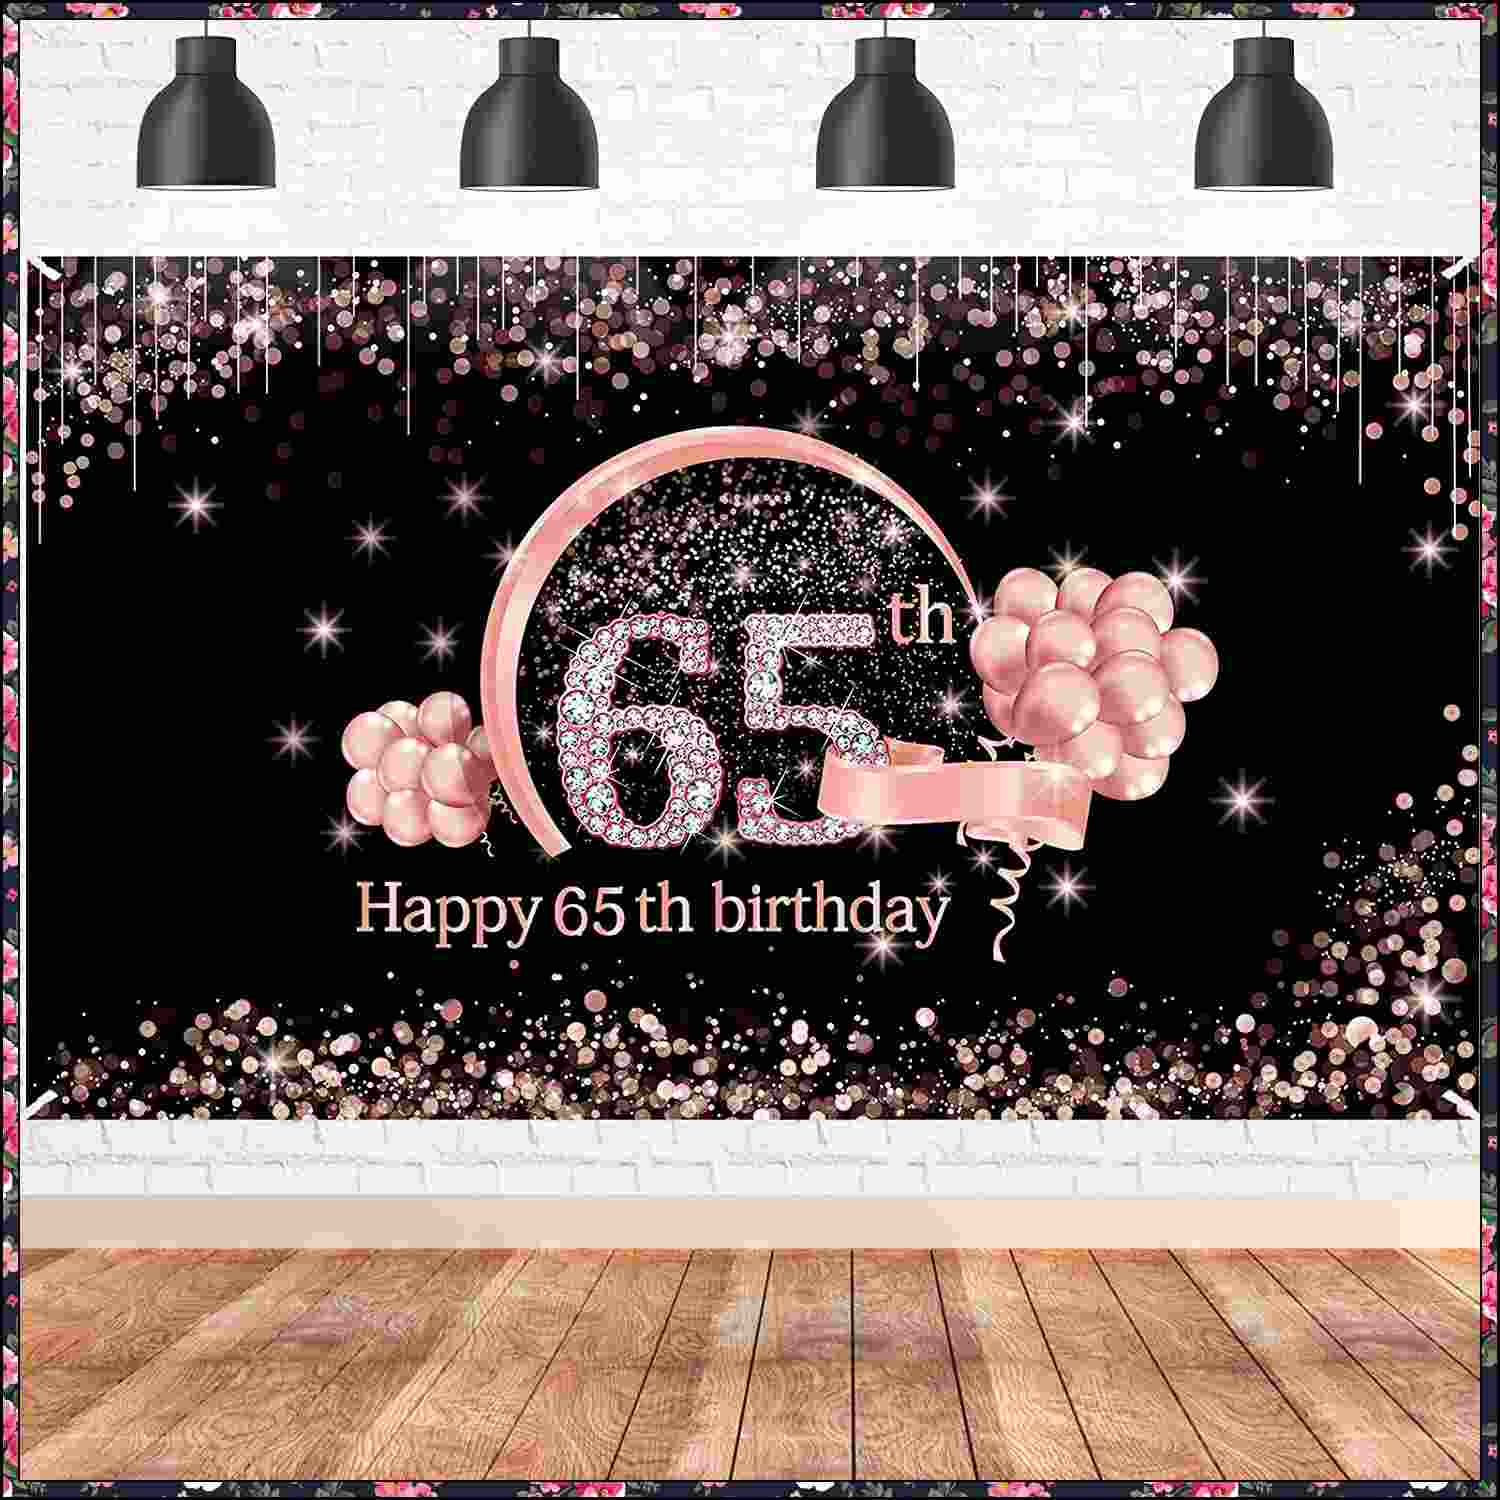 65th birthday images for her
